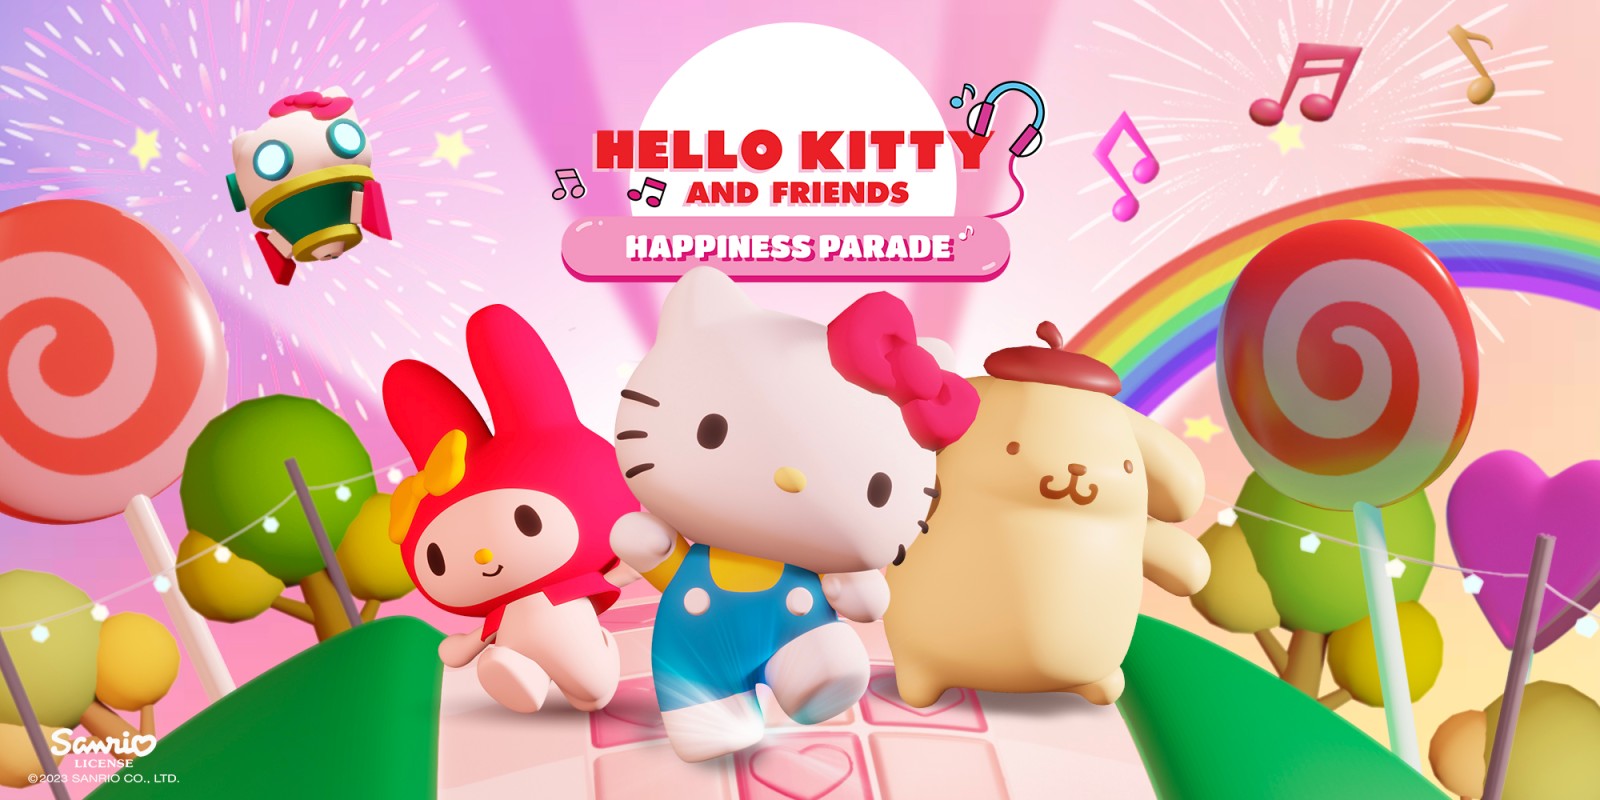 https://fs-prod-cdn.nintendo-europe.com/media/images/10_share_images/games_15/nintendo_switch_download_software_1/2x1_NSwitchDS_HelloKittyAndFriendsHappinessParade_image1600w.jpg